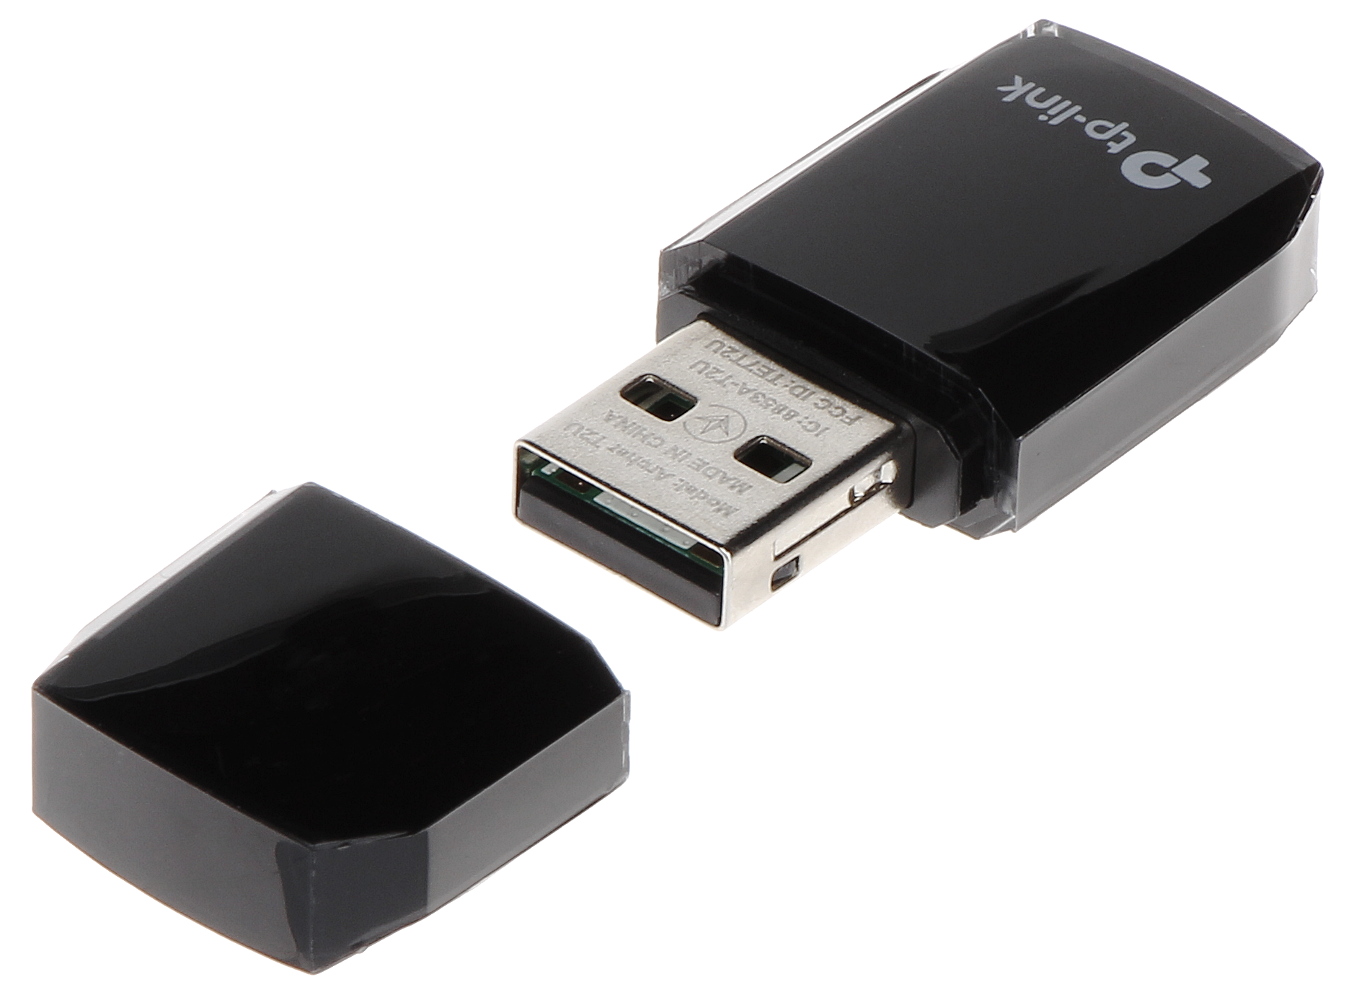 WLAN USB ADAPTER ARCHER-T2U TP-LINK - 2.4 GHz and 5 GHz Wireless Card  Adapters - Delta